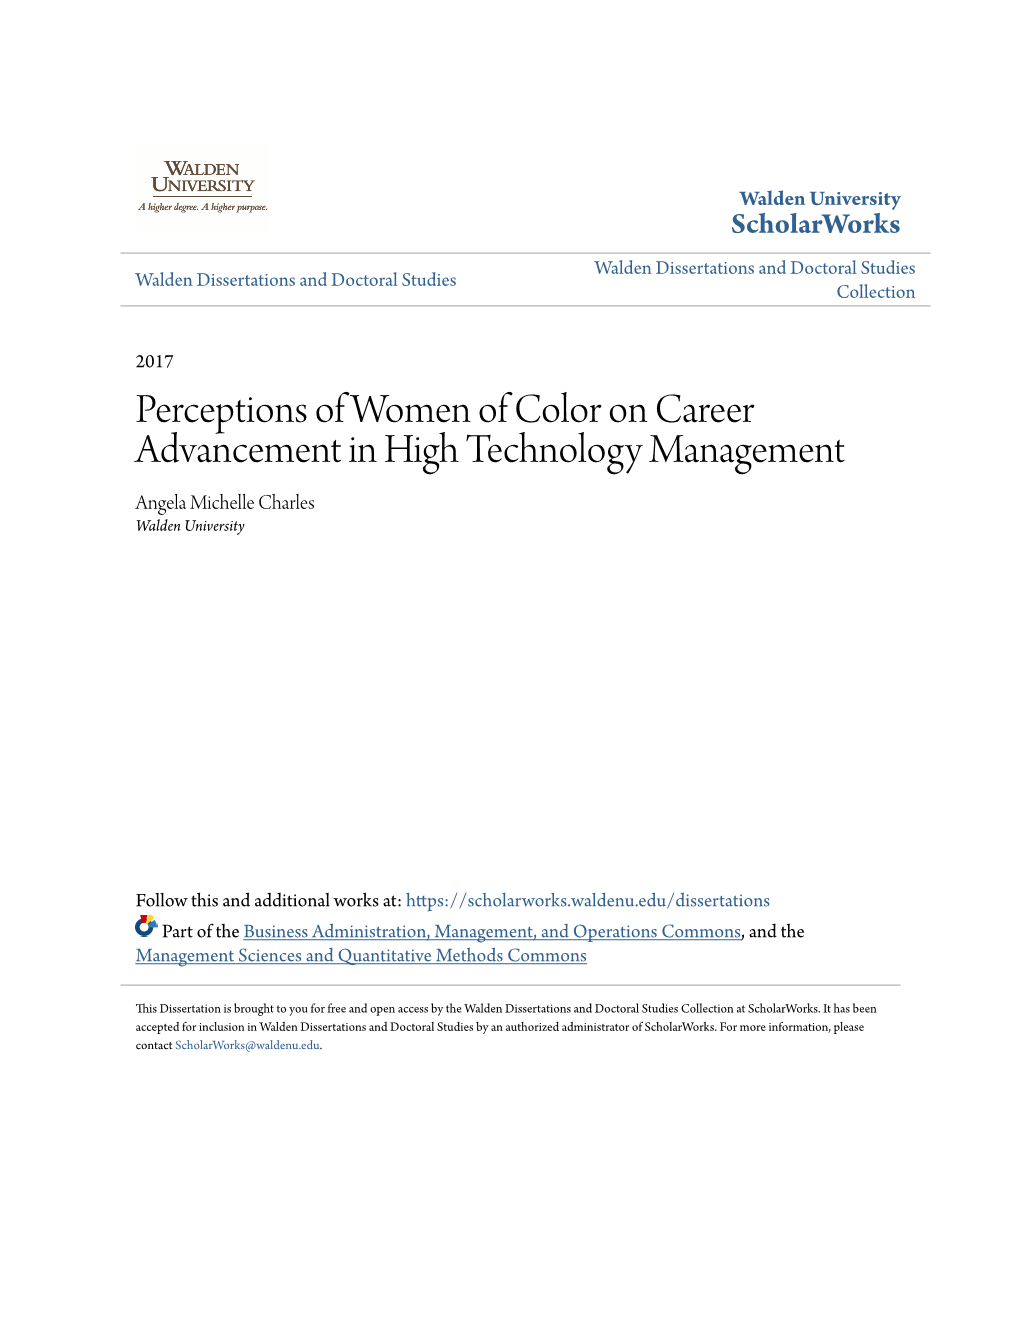 Perceptions of Women of Color on Career Advancement in High Technology Management Angela Michelle Charles Walden University